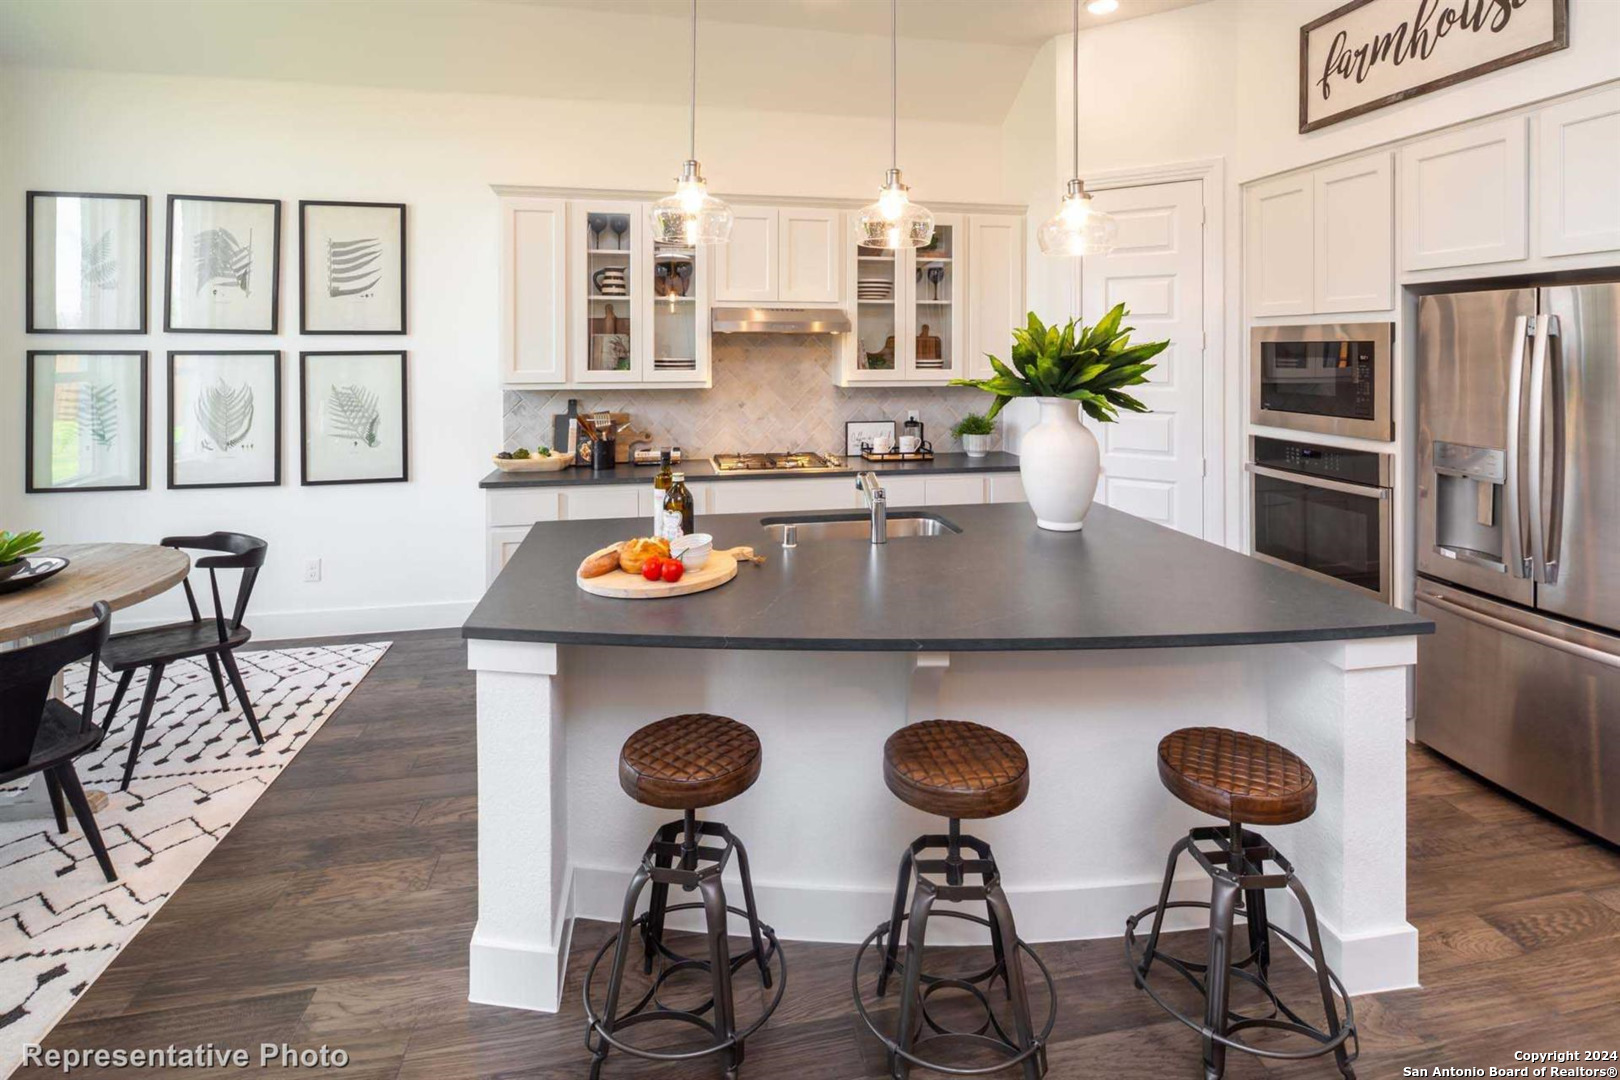 a kitchen with stainless steel appliances granite countertop a dining table chairs stove and sink